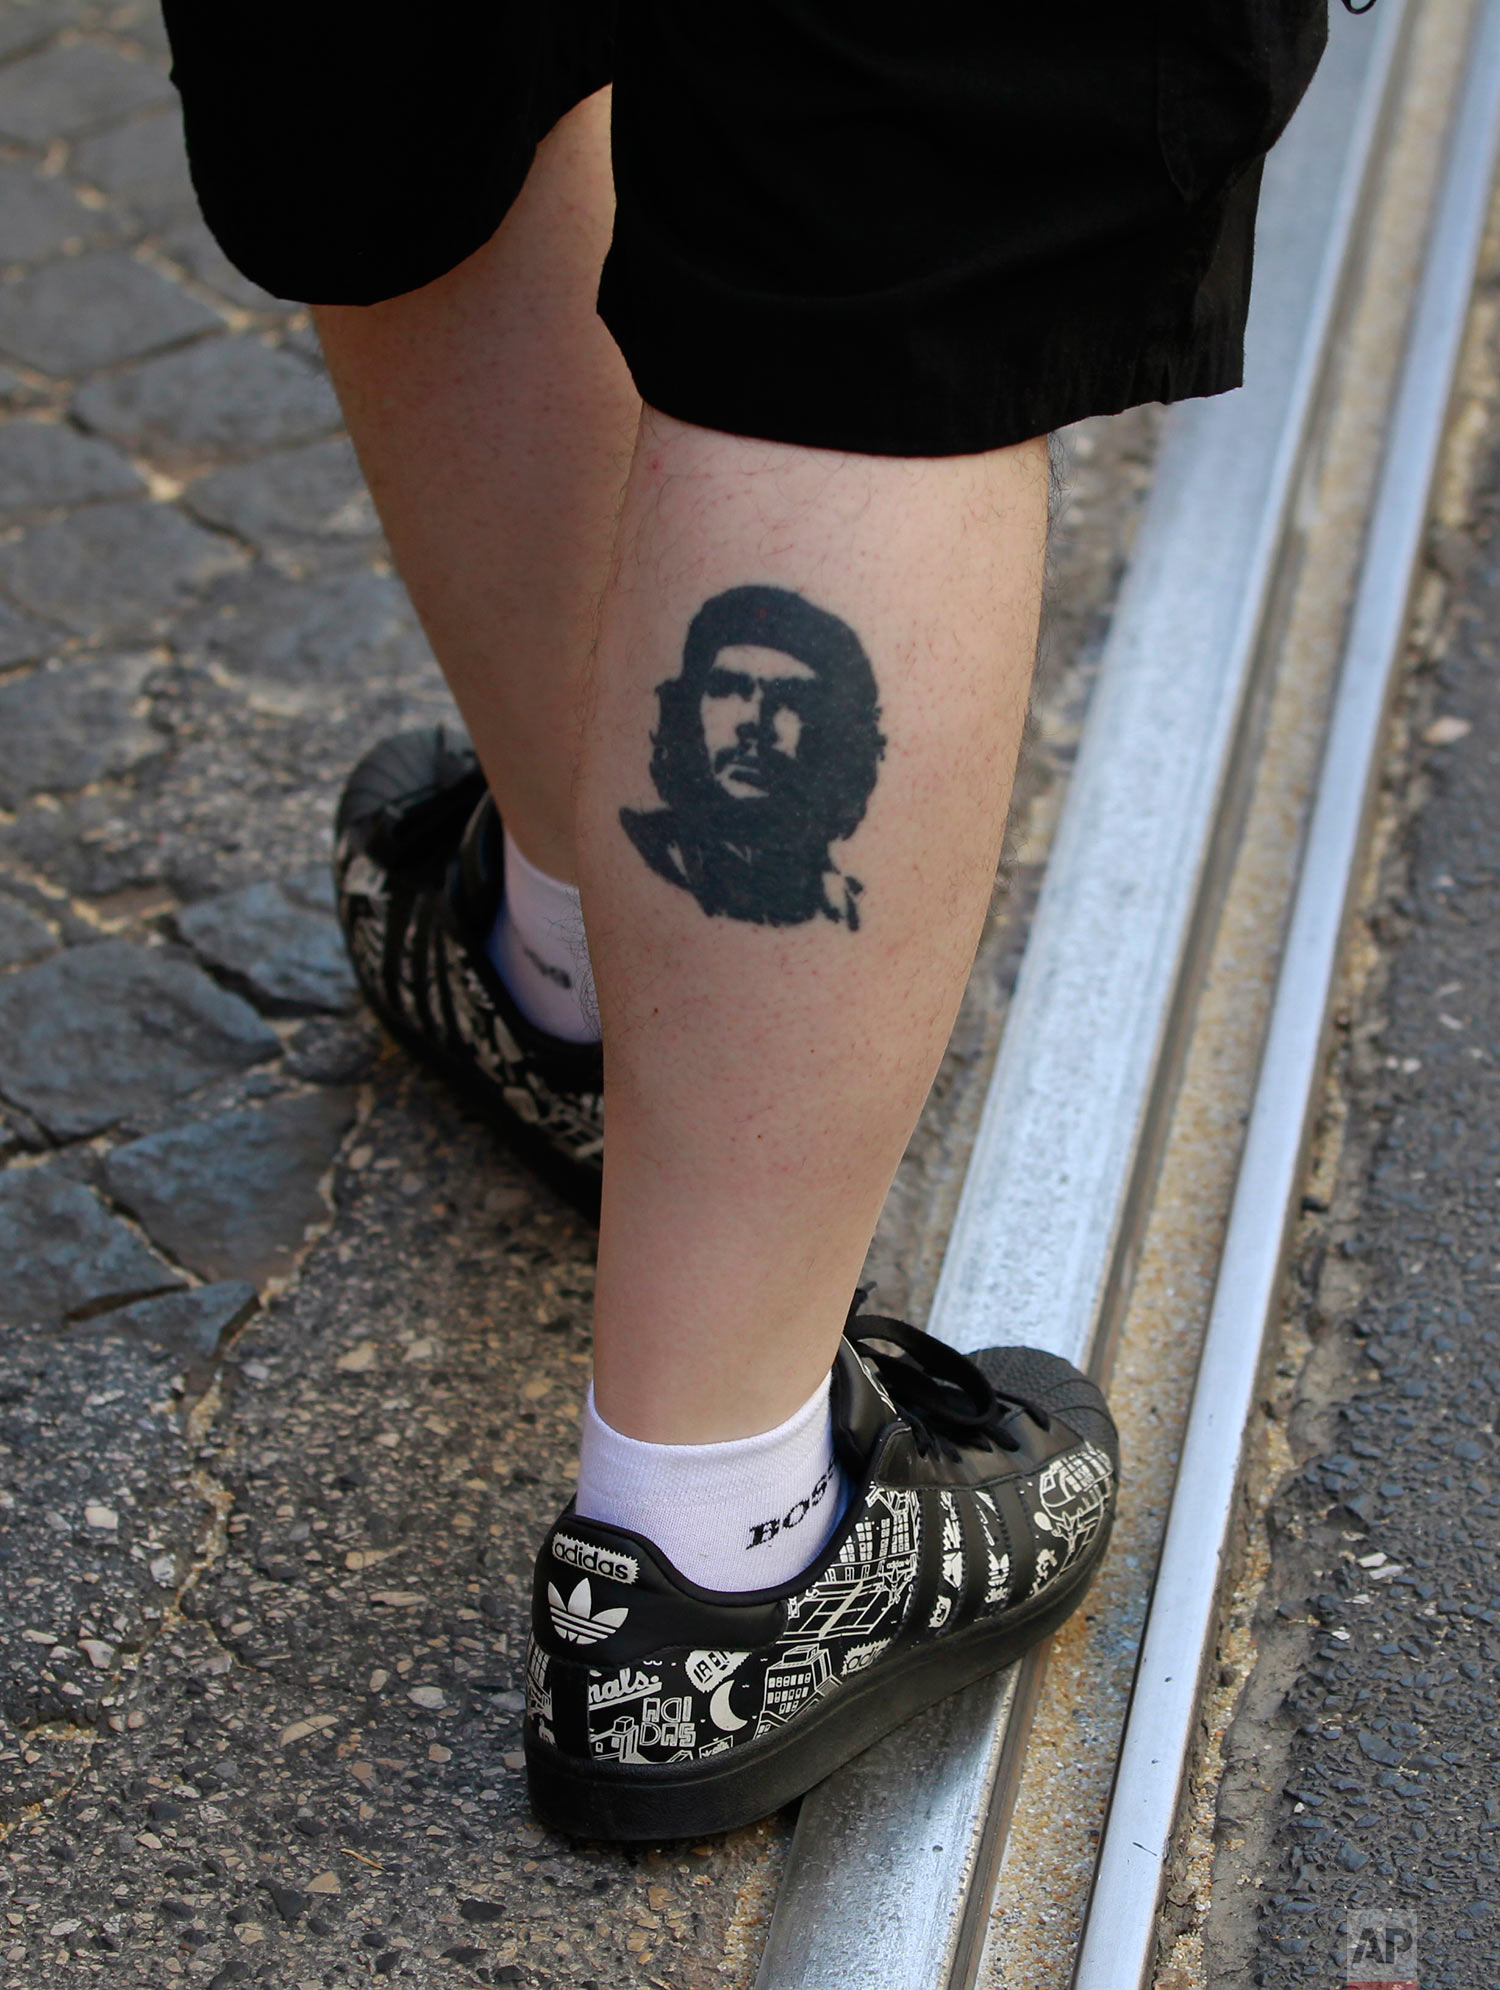  A protestor wearing a tattoo of Cuba's revolution leader Ernesto "Che" Guevara takes part in a demonstration in Lisbon against the government's plans of making it easier to lay-off people Thursday, July 28 2011. (AP Photo/Armando Franca) 